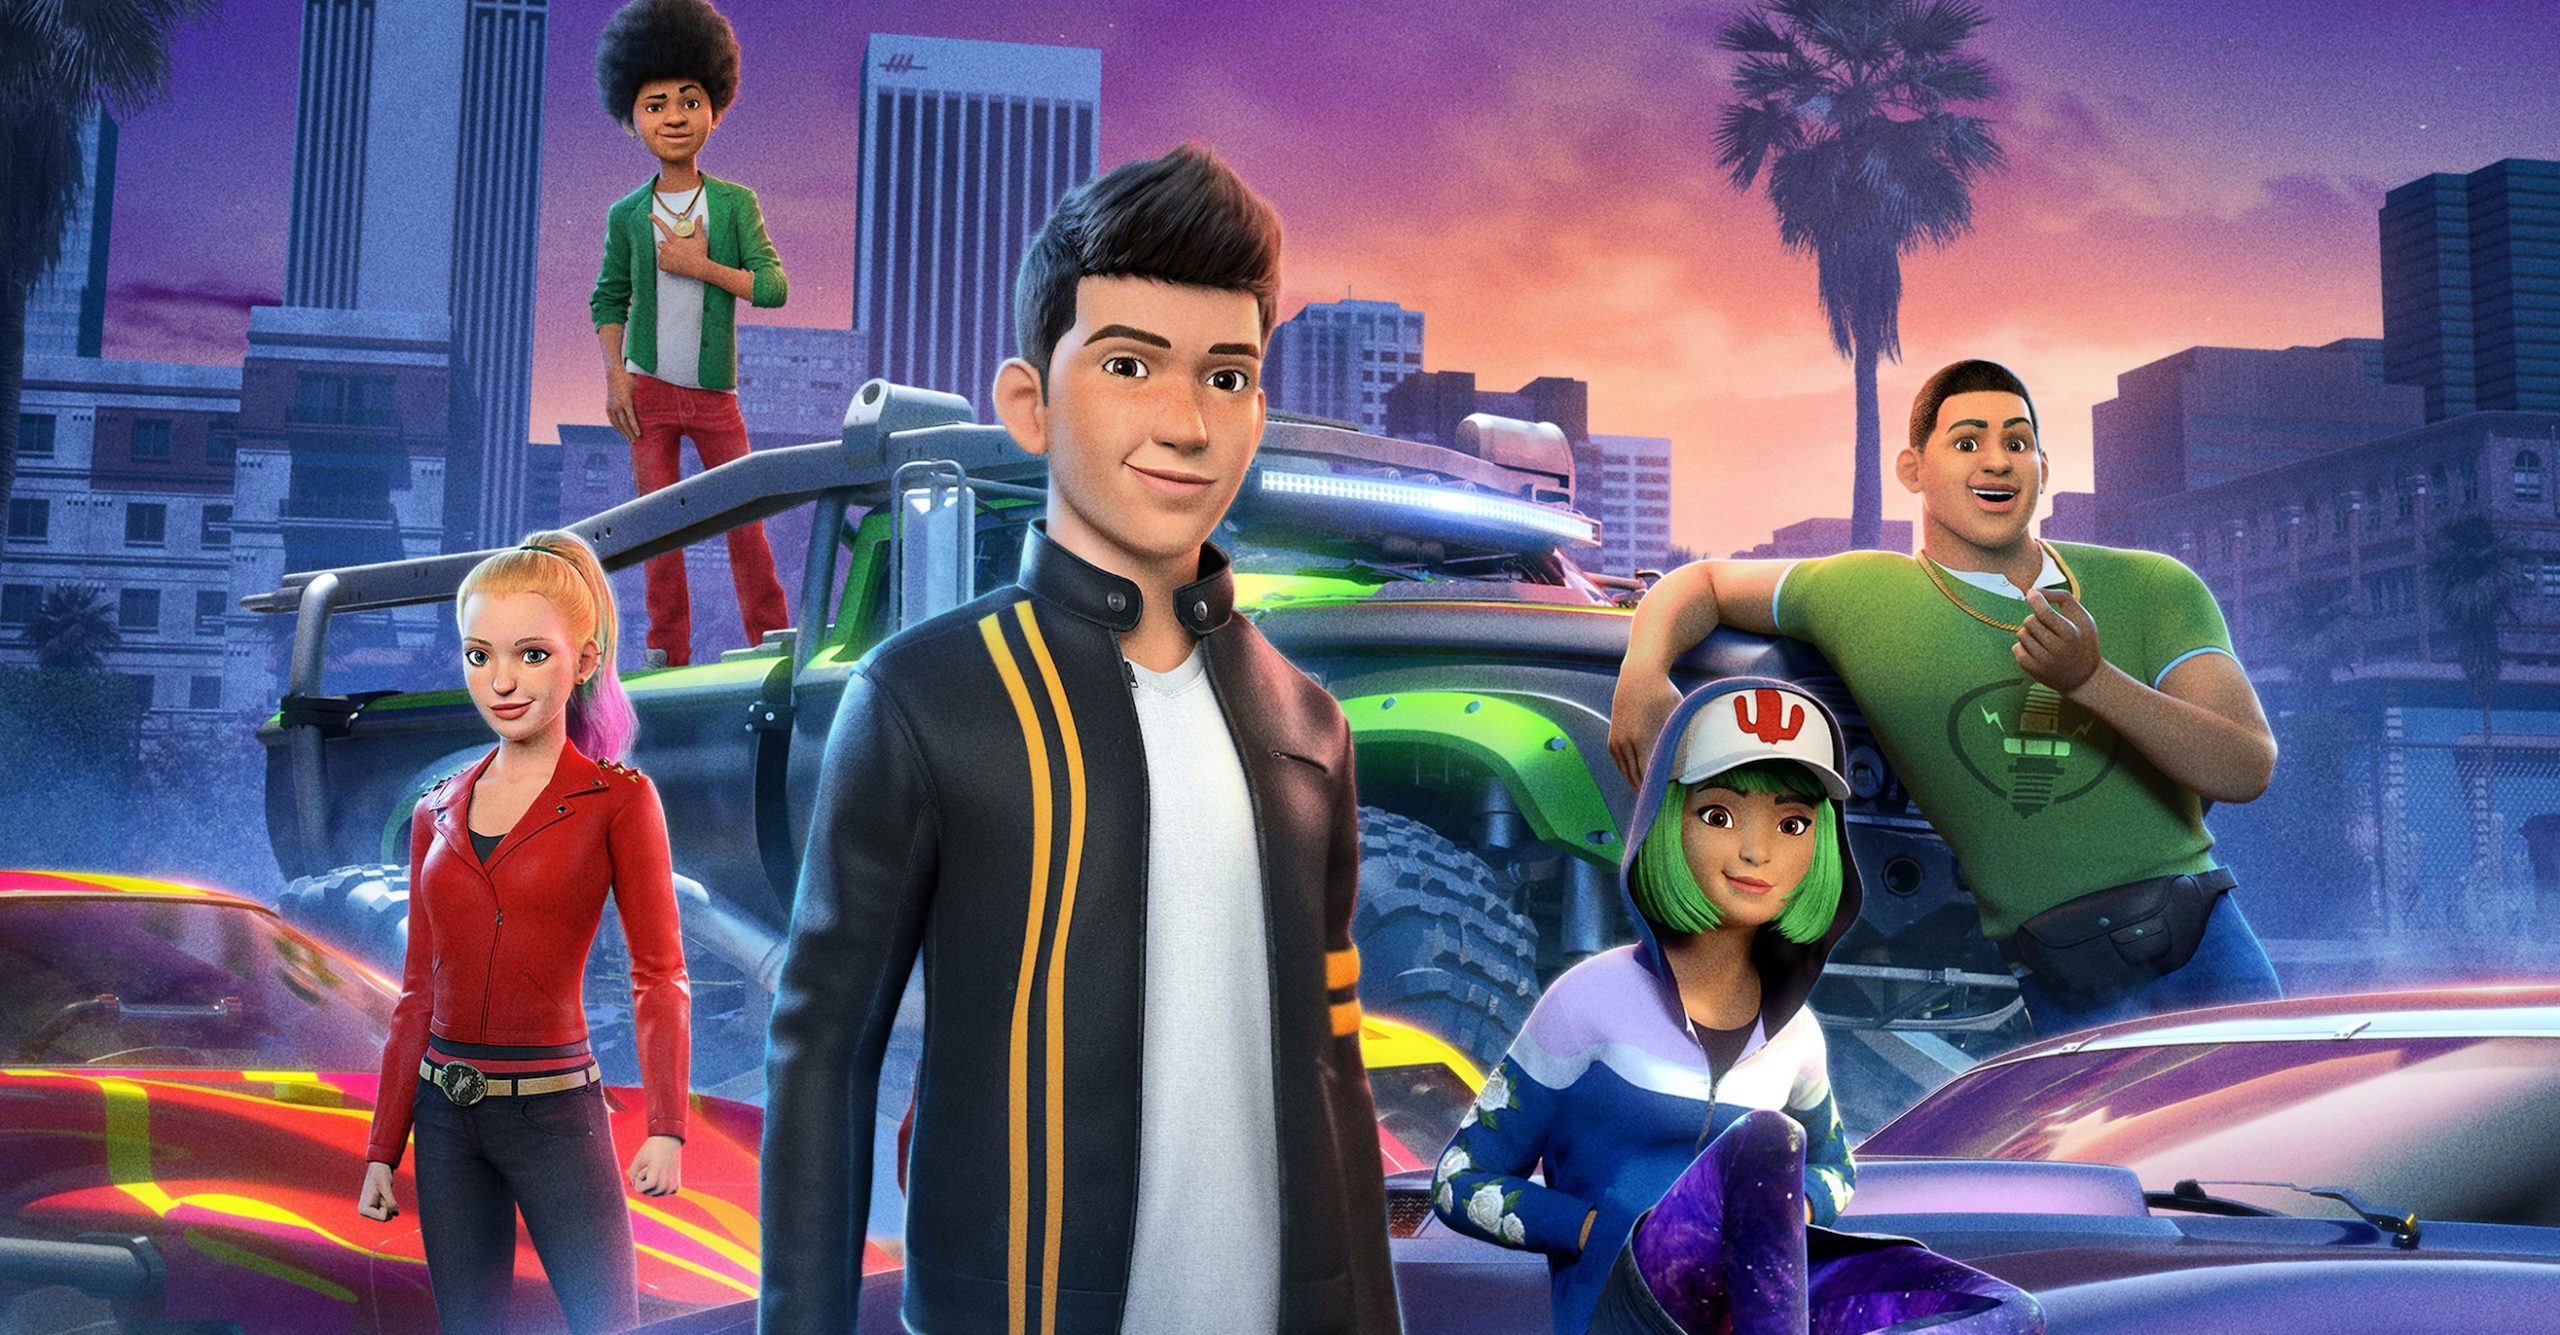 Giveaway: Win A $50 Gift Card From Dreamworks’ ‘Fast & Furious: Spy Racers’ Season 2!